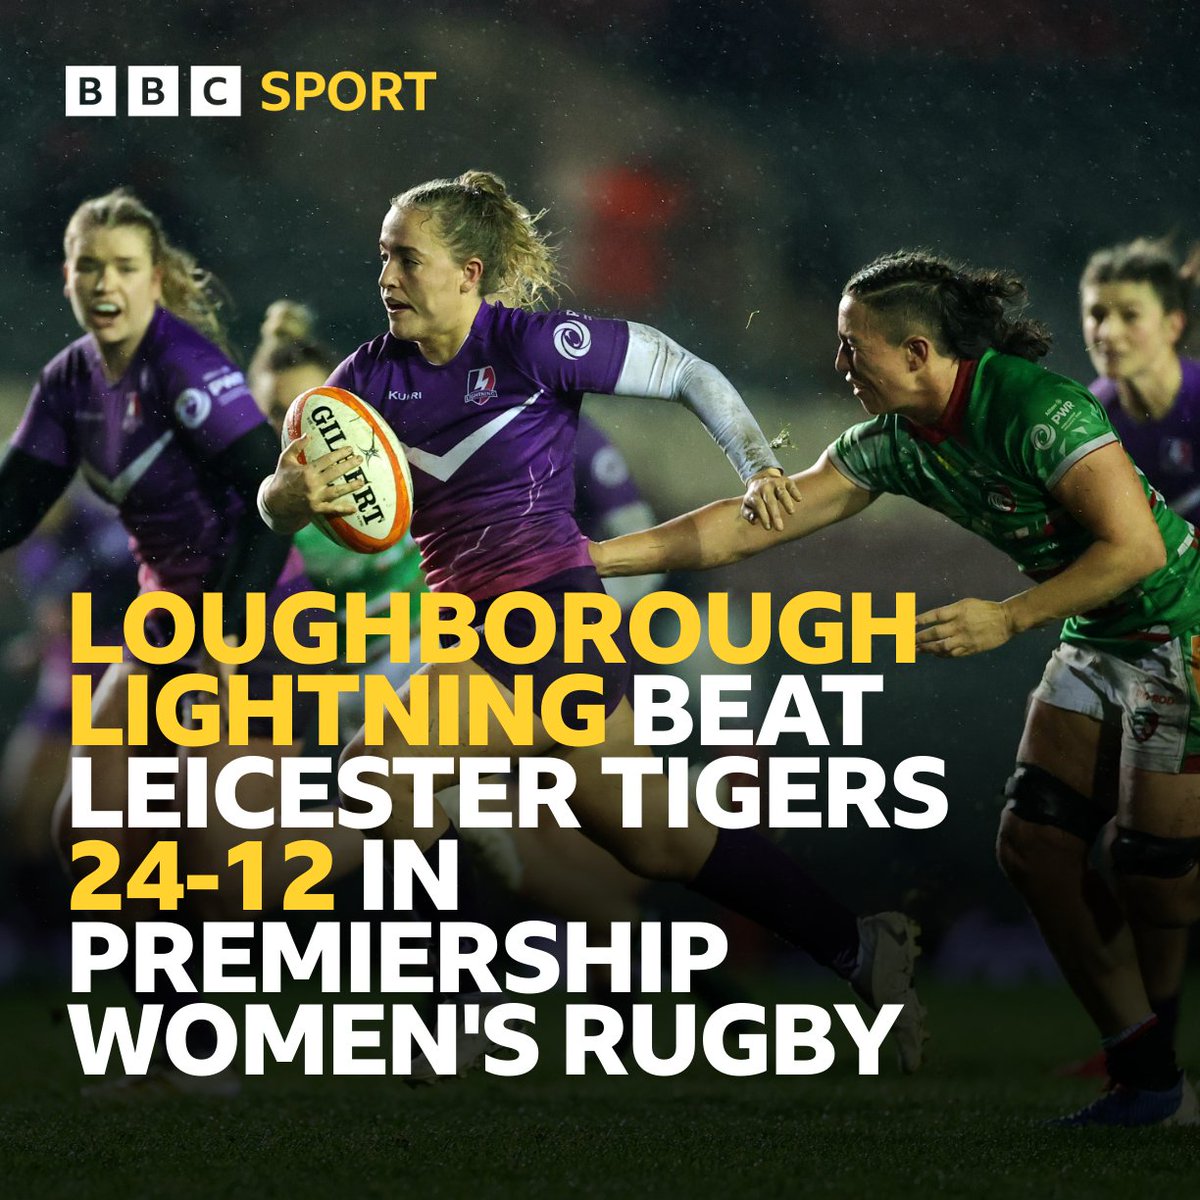 The first ever Leicestershire Derby in top flight professional sport has been won by 𝐋𝐨𝐮𝐠𝐡𝐛𝐨𝐫𝐨𝐮𝐠𝐡 𝐋𝐢𝐠𝐡𝐭𝐧𝐢𝐧𝐠 ⚡️ They've beaten Leicester Tigers Women 24-12 at a cold, wet Welford Road 🏉